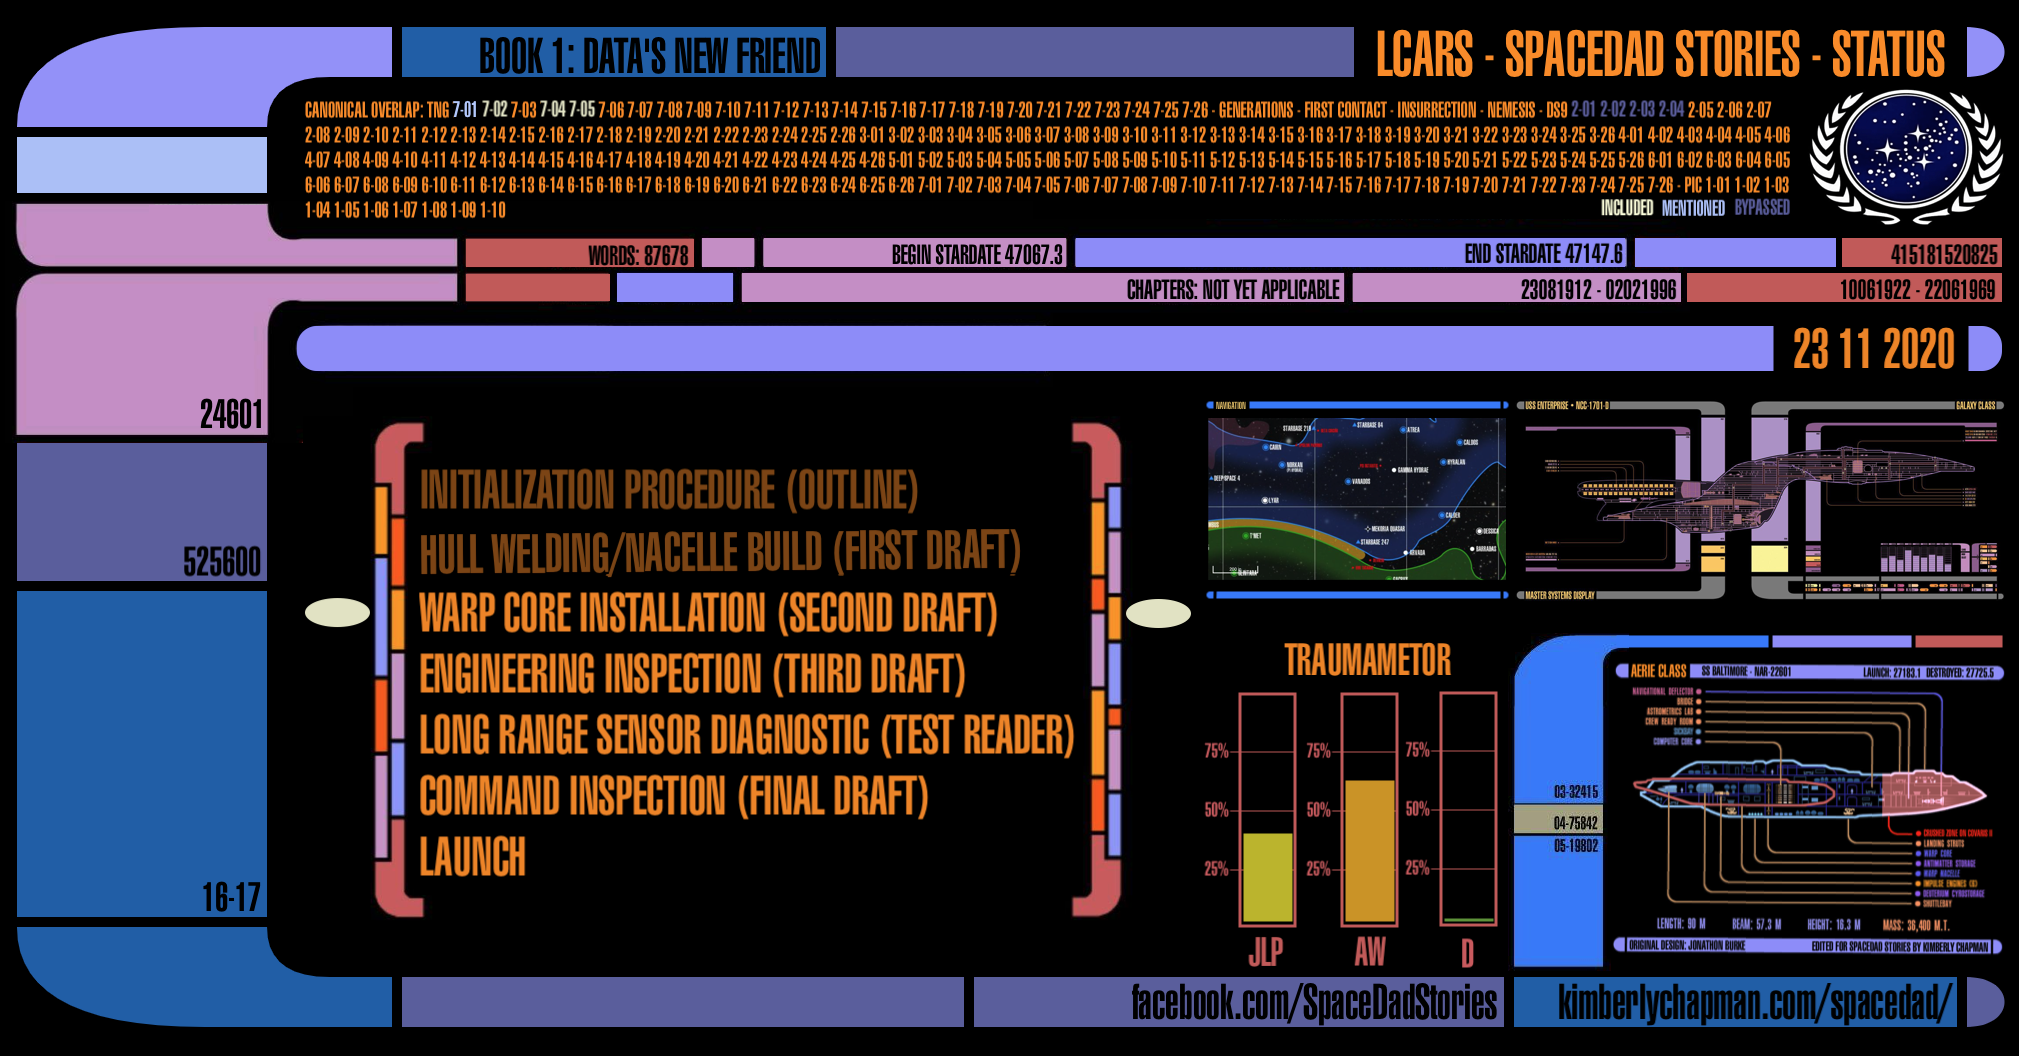 LCARS screen with updated information on the next book's progress.  Primary information: the book is in the second draft phase as of 23 11 2020 and is titled Data's New Friend.